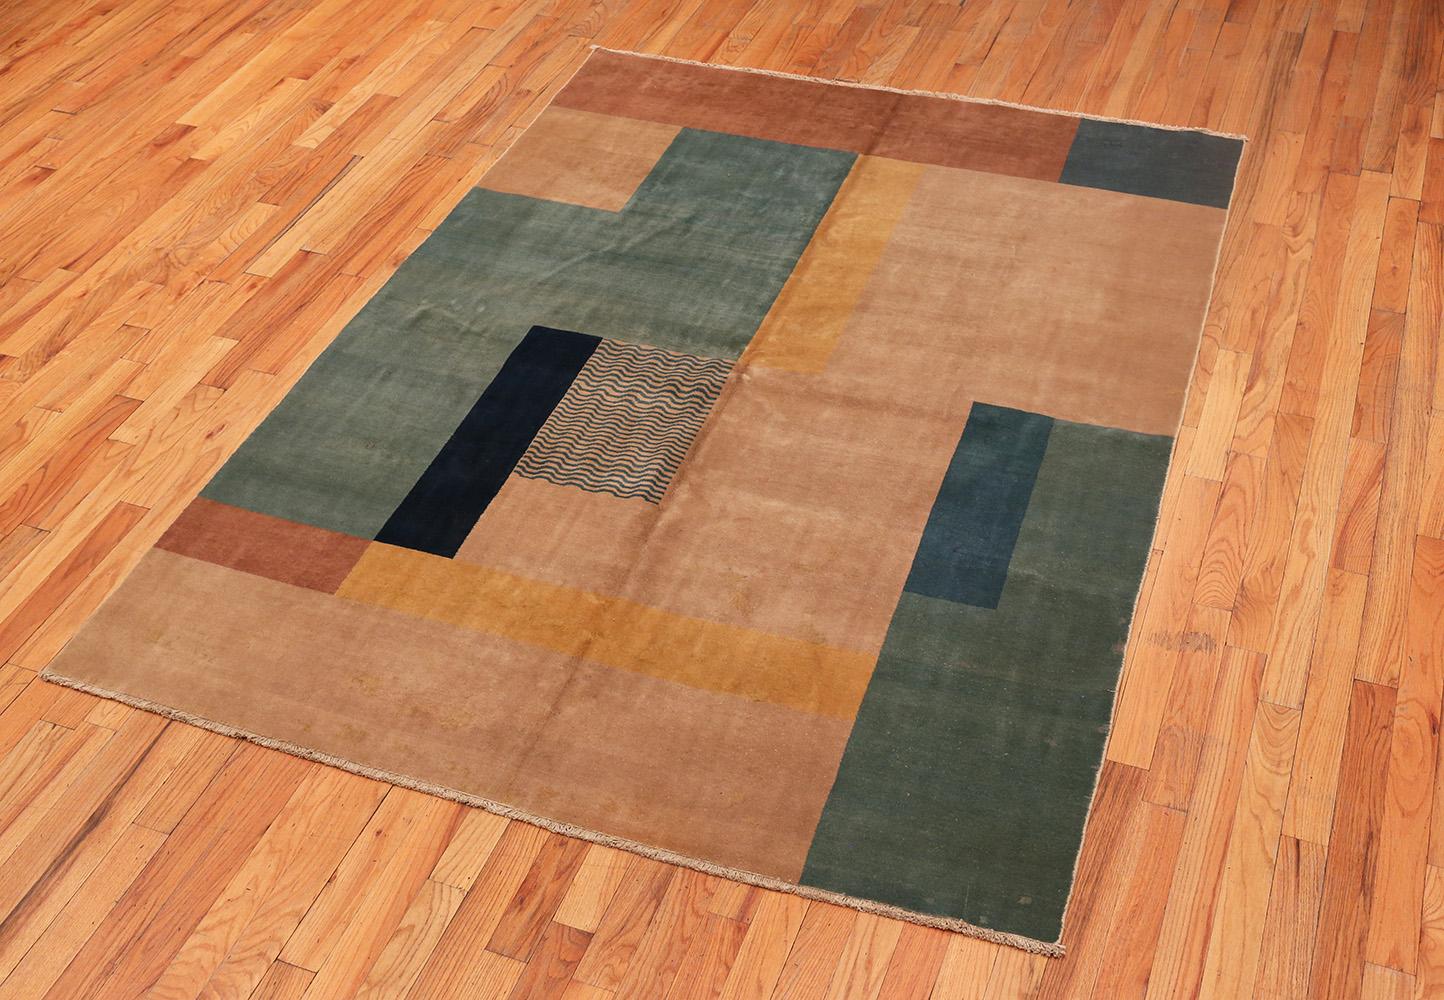 Beautiful Vintage Mid Century Art Deco Indian Rug, Country Of Origin / Rug Type: Indian Rug, Circa Date: Mid 20th Century. Size: 6 ft 10 in x 9 ft 3 in (2.08 m x 2.82 m)

This vibrant, spirited mid-century modern rug would fit in well alongside